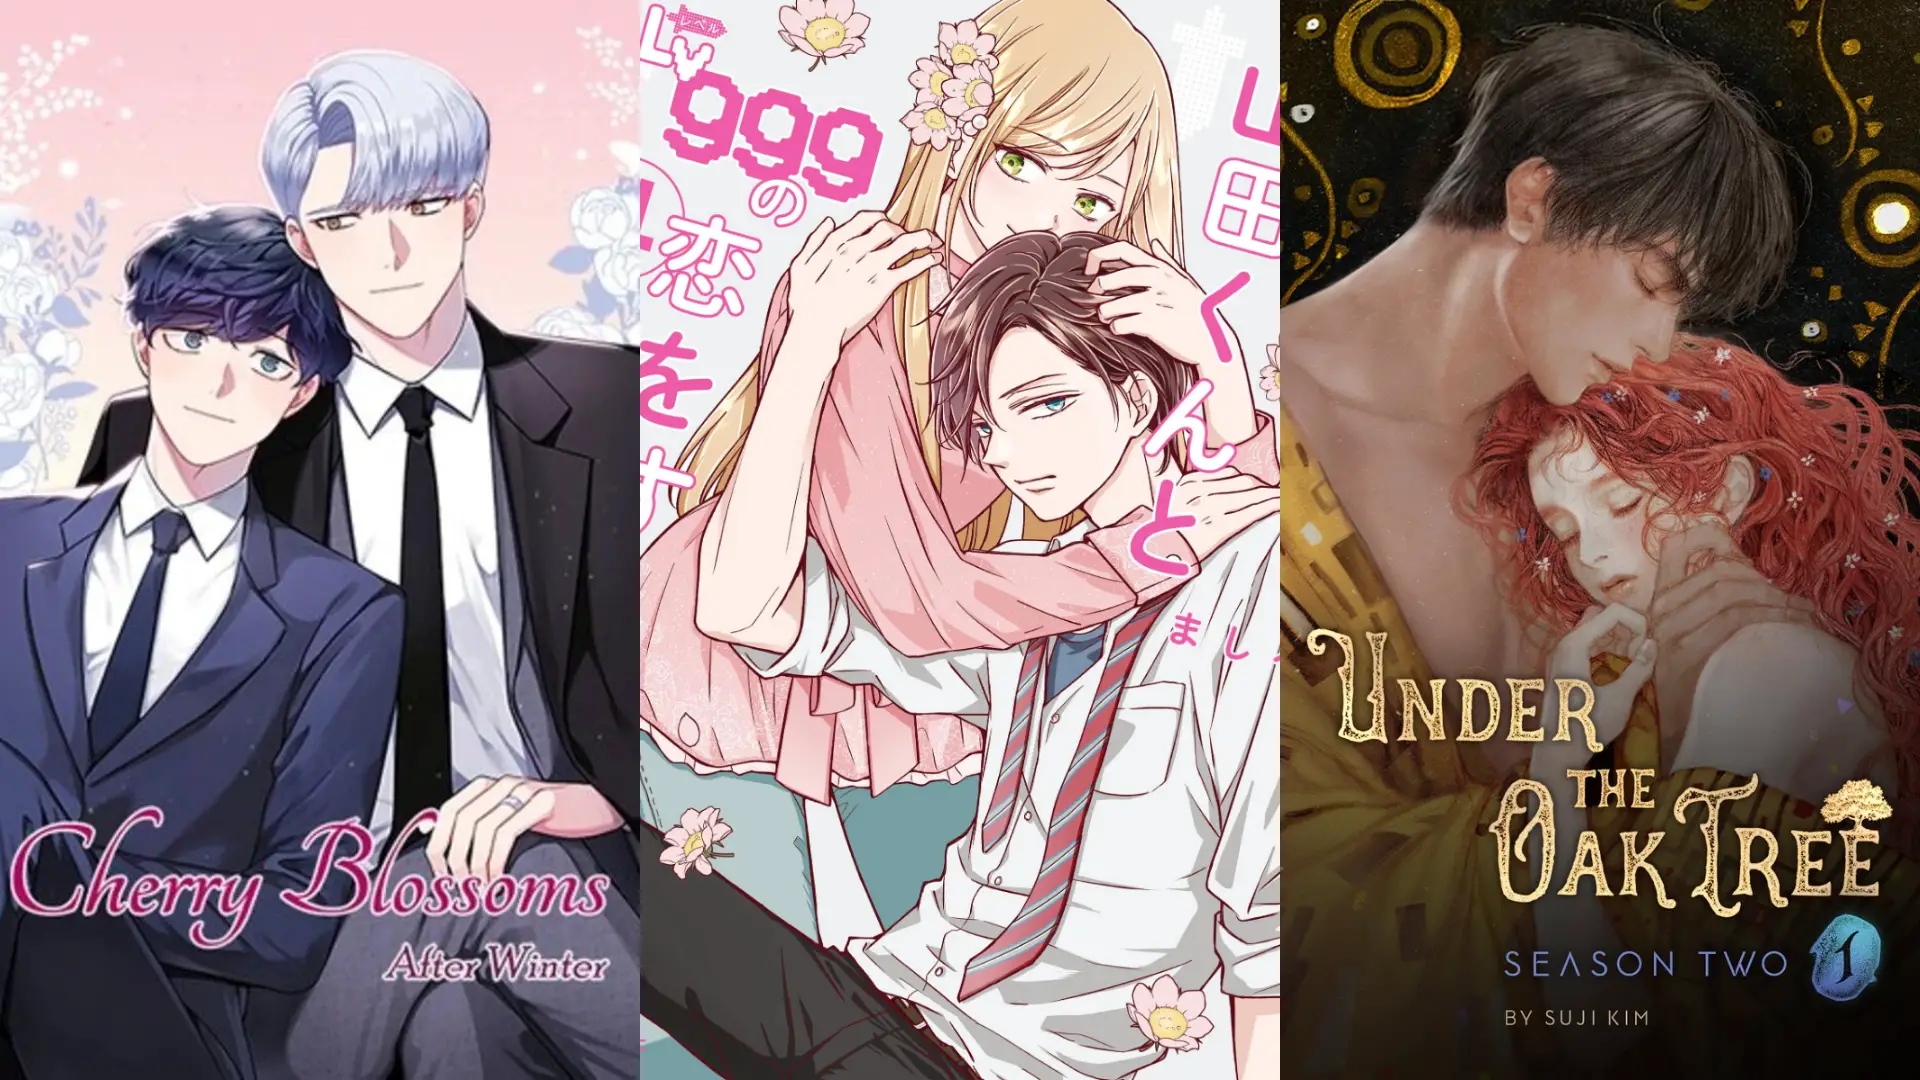 INKLORE Imprint To Publish Under the Oak Tree, Loving Yamada at Lv999 and More in English